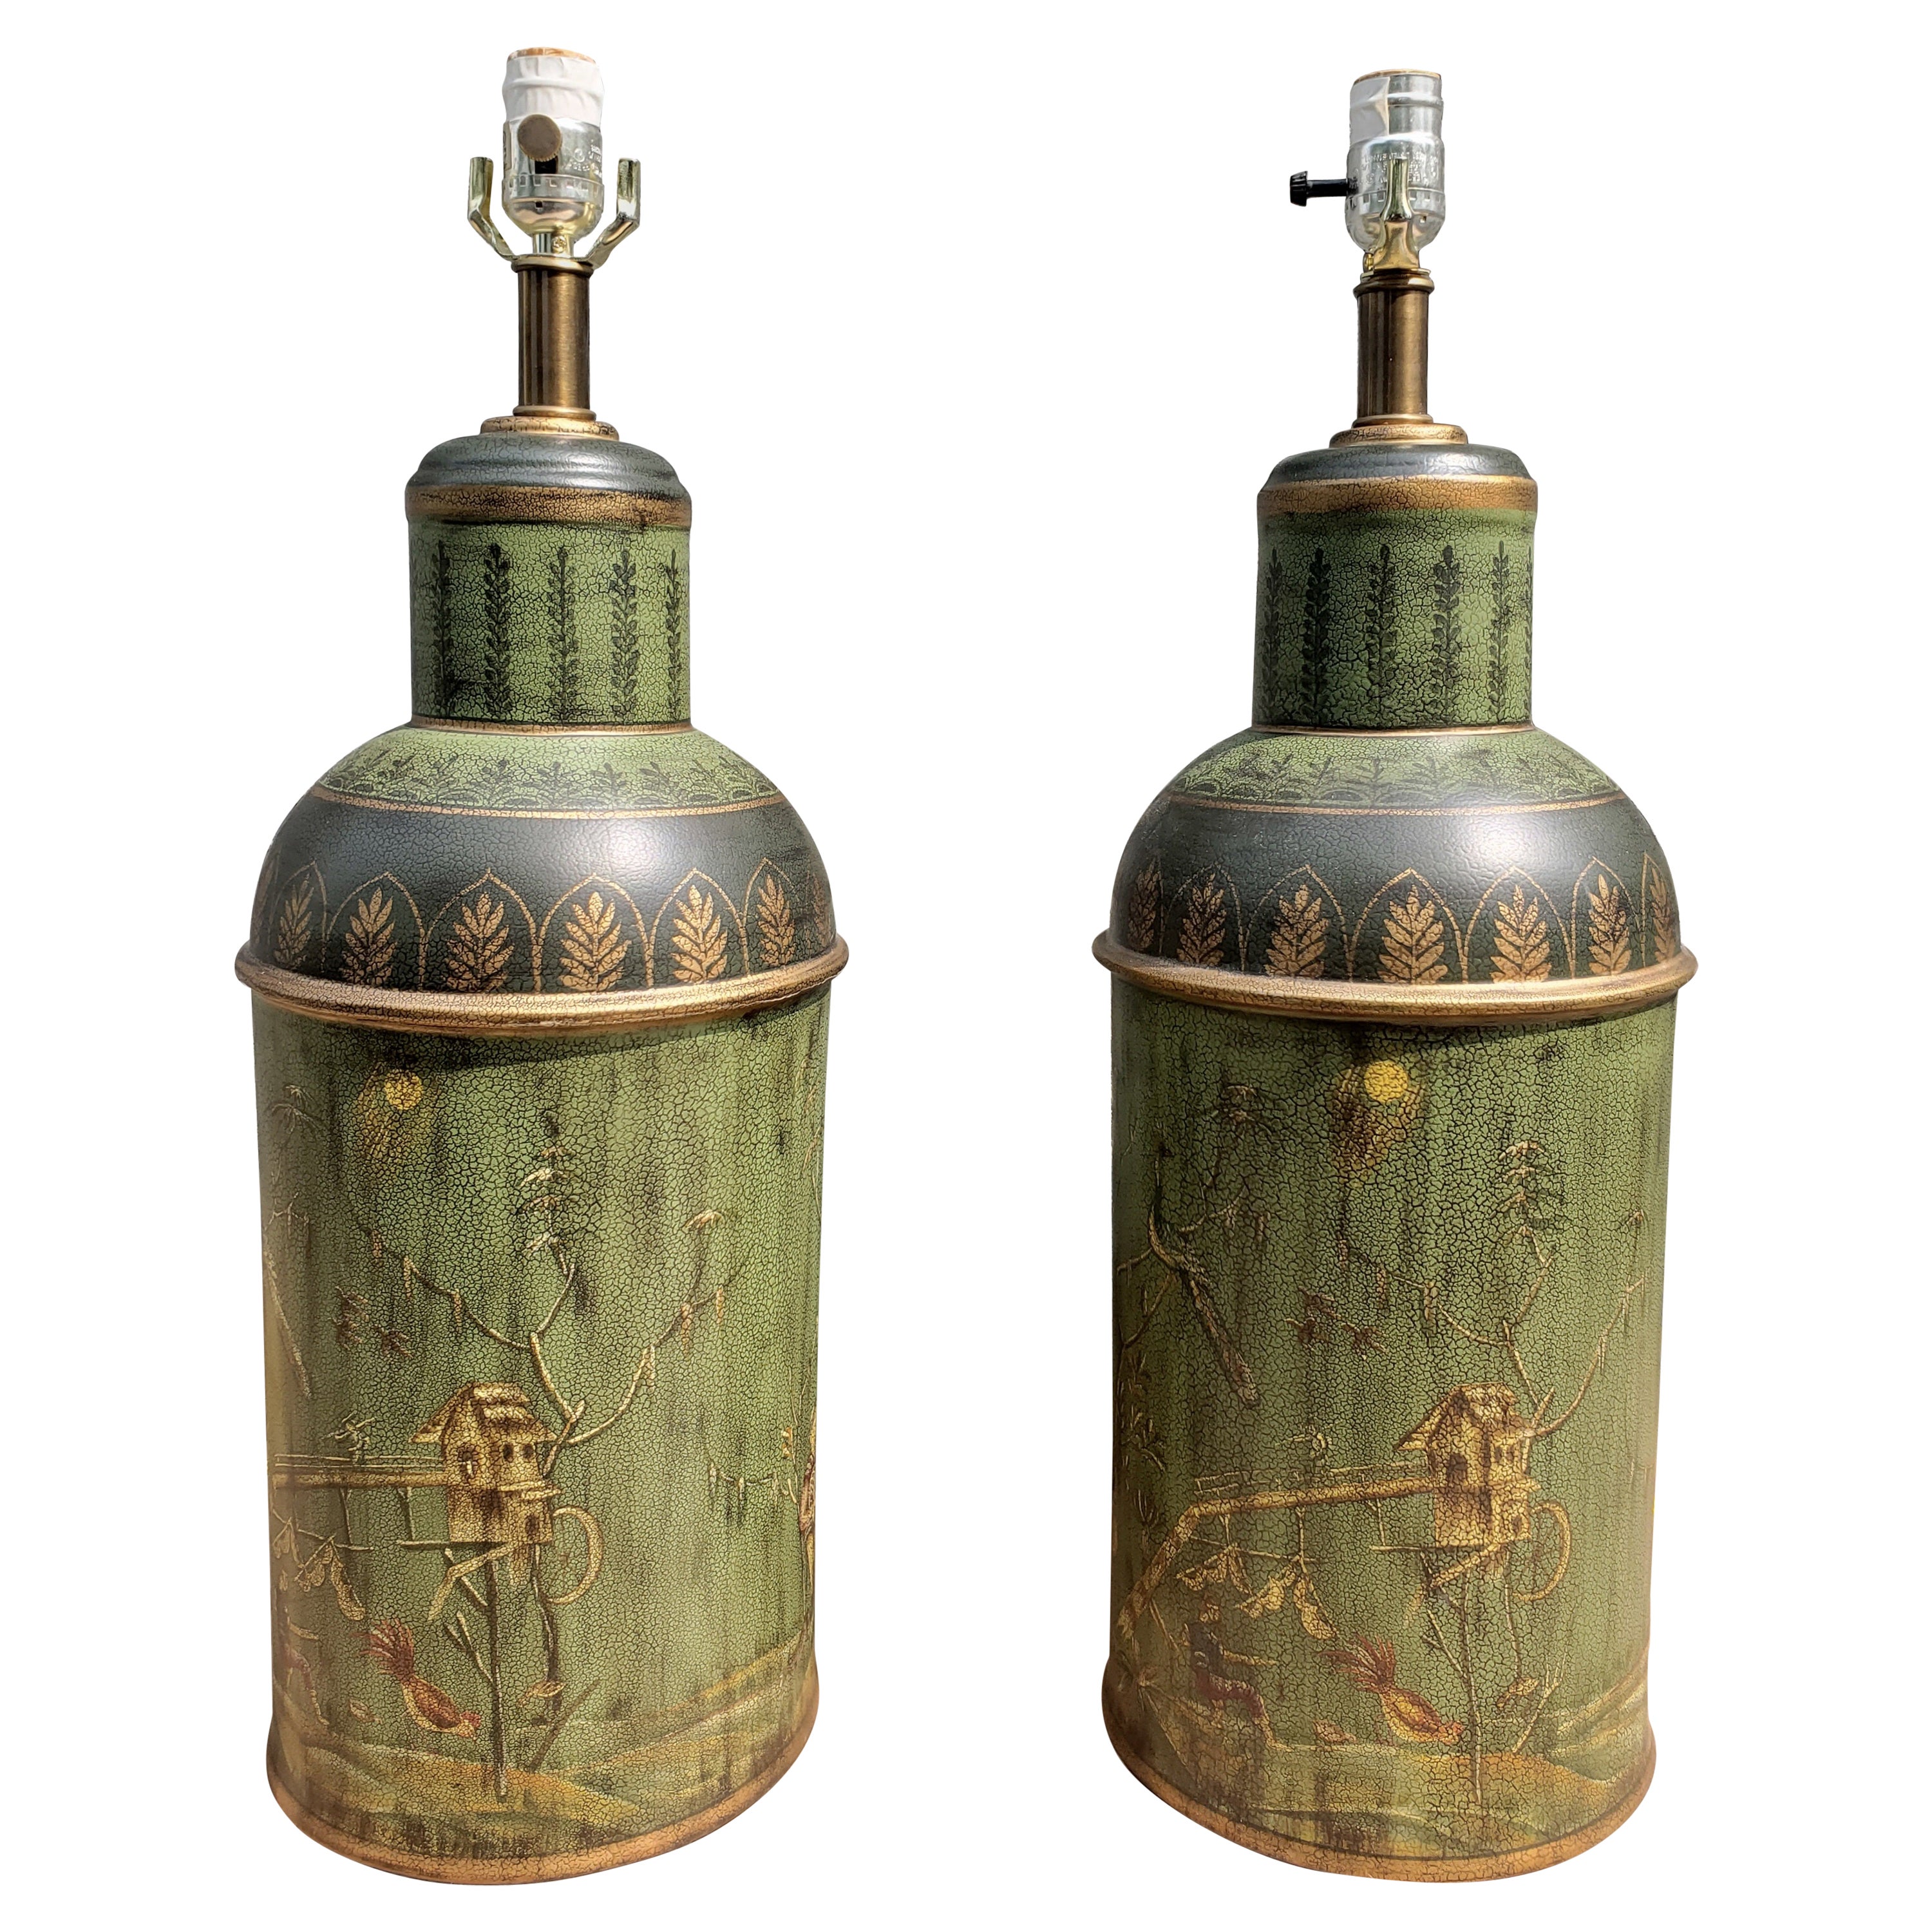 Pair of Asian Ornate Tooled Leather Over Tole Tea Canisters Mounted as Lamps